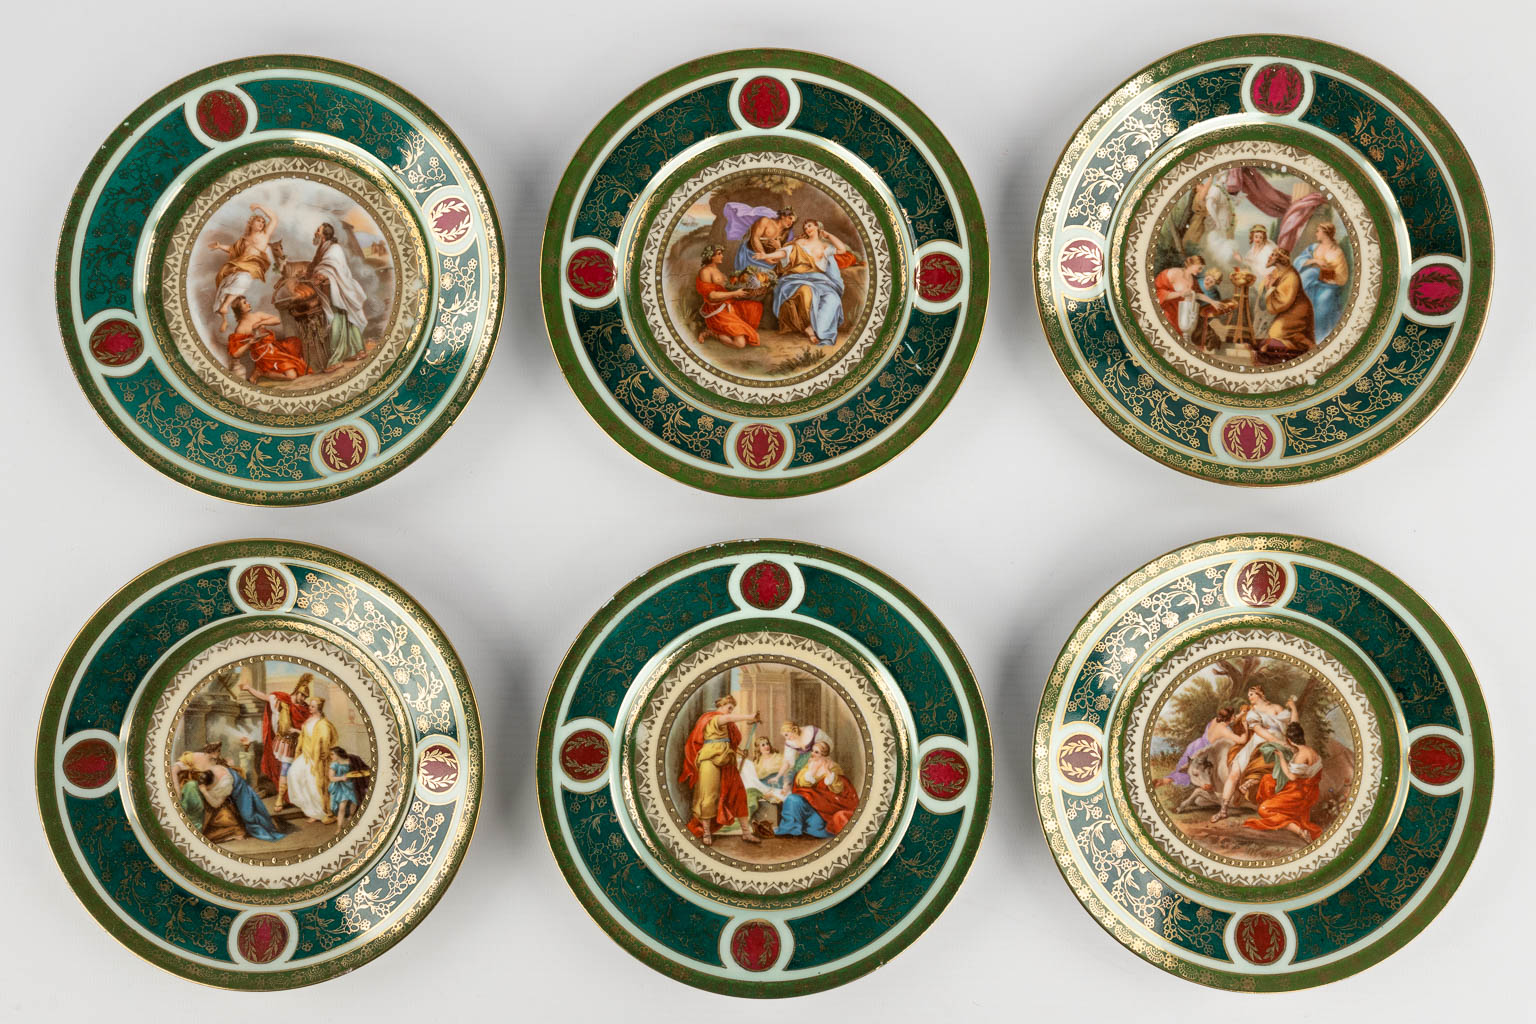 Vienna Porcelain, a set of 9 plates with printed decor. 20th C. (D:25 x W:27 cm)